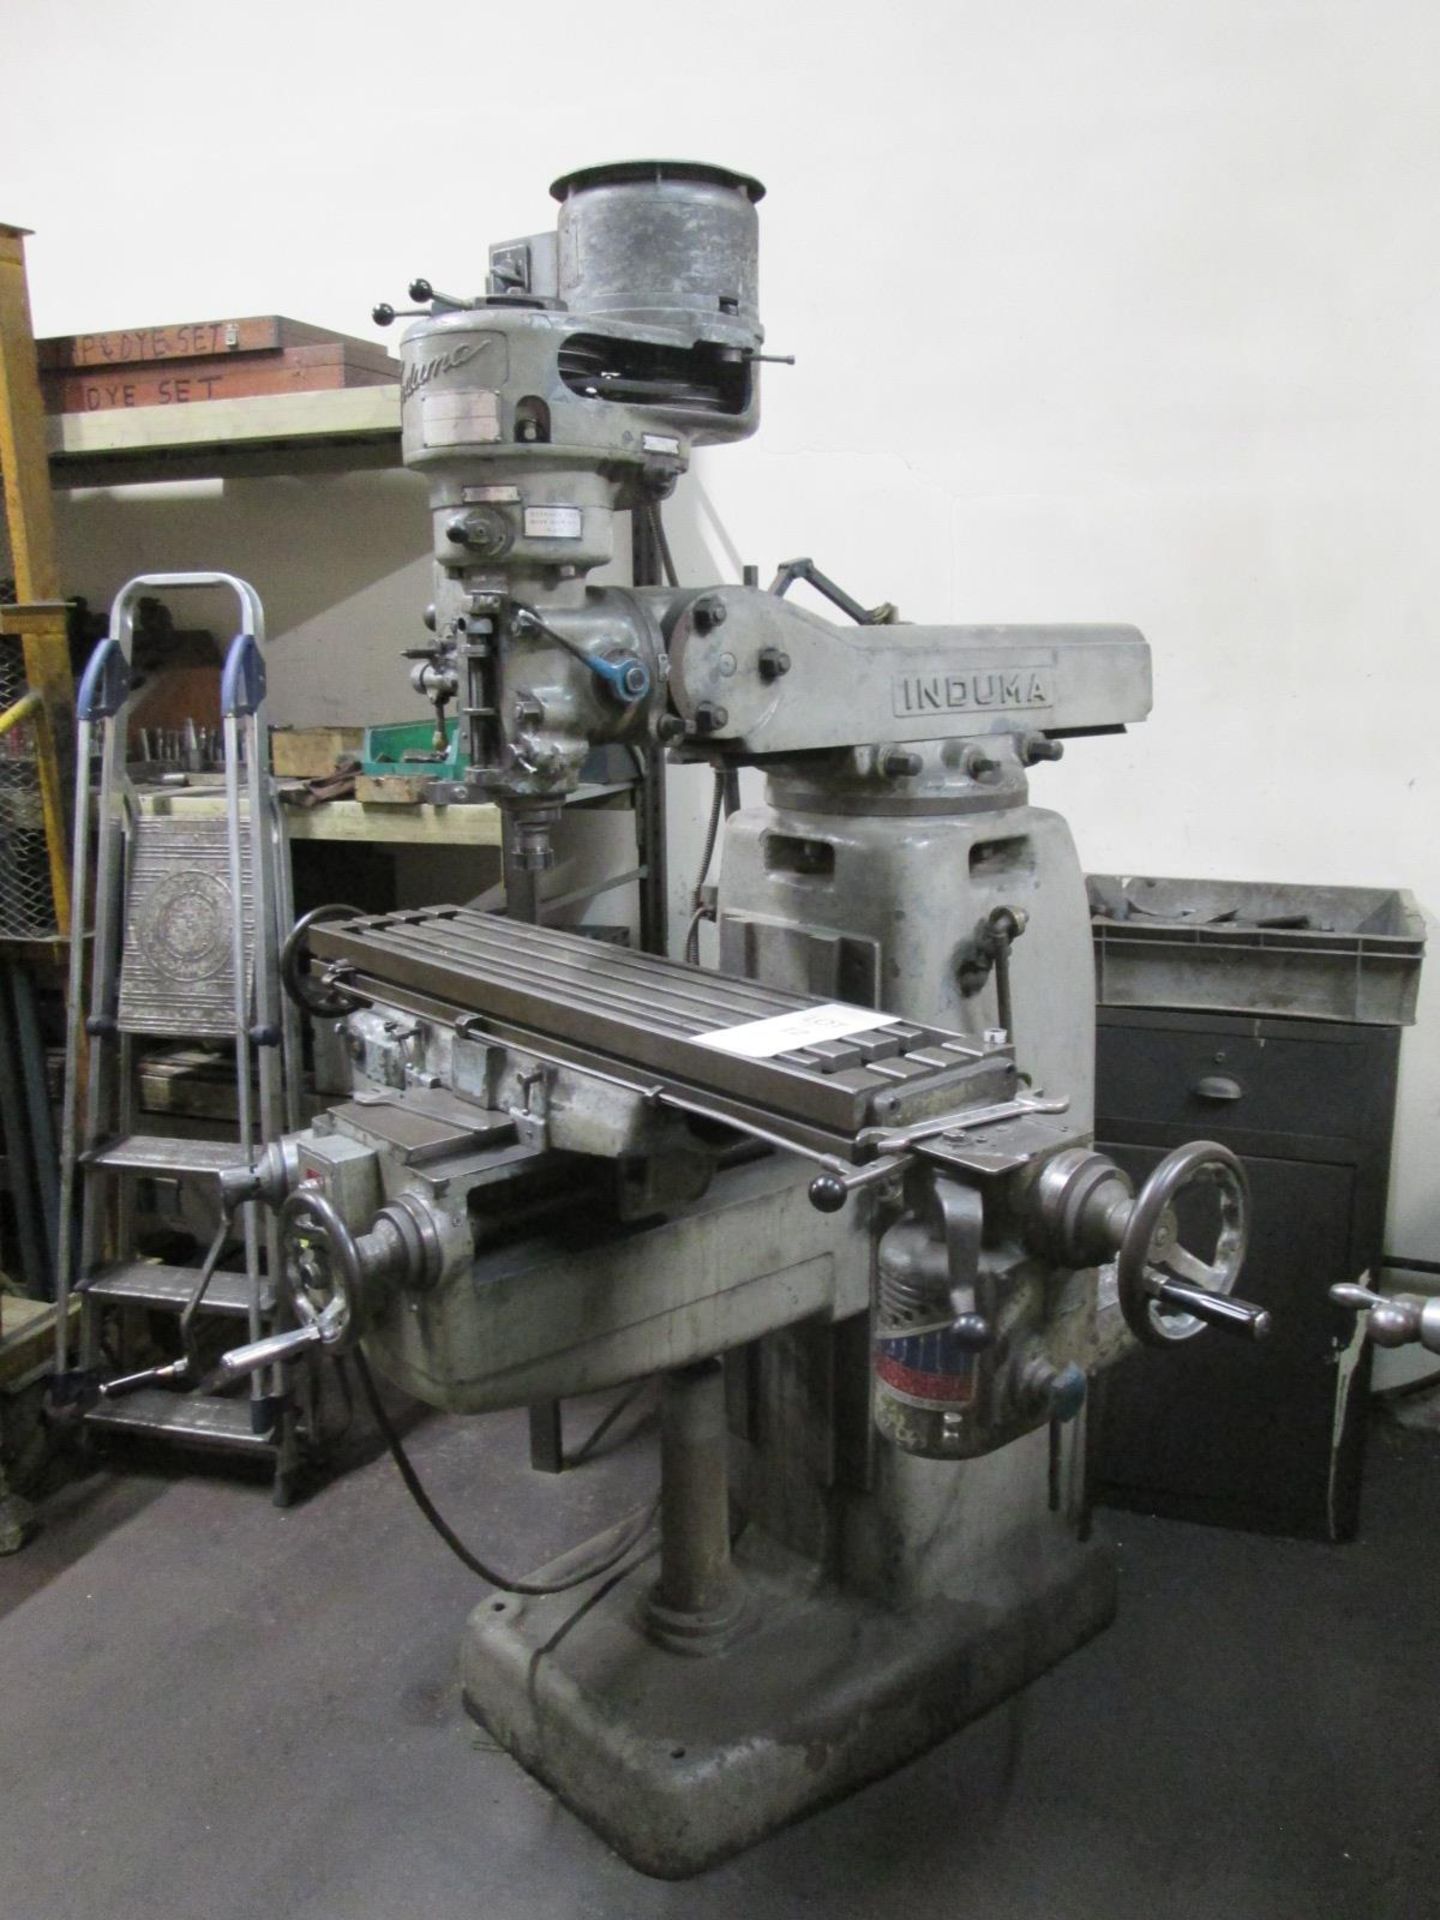 Induma Turret Head Milling Machine, Table size 1060 mm x 230 mm, Spindle speeds 65-2200 rpm (belt - Image 2 of 11